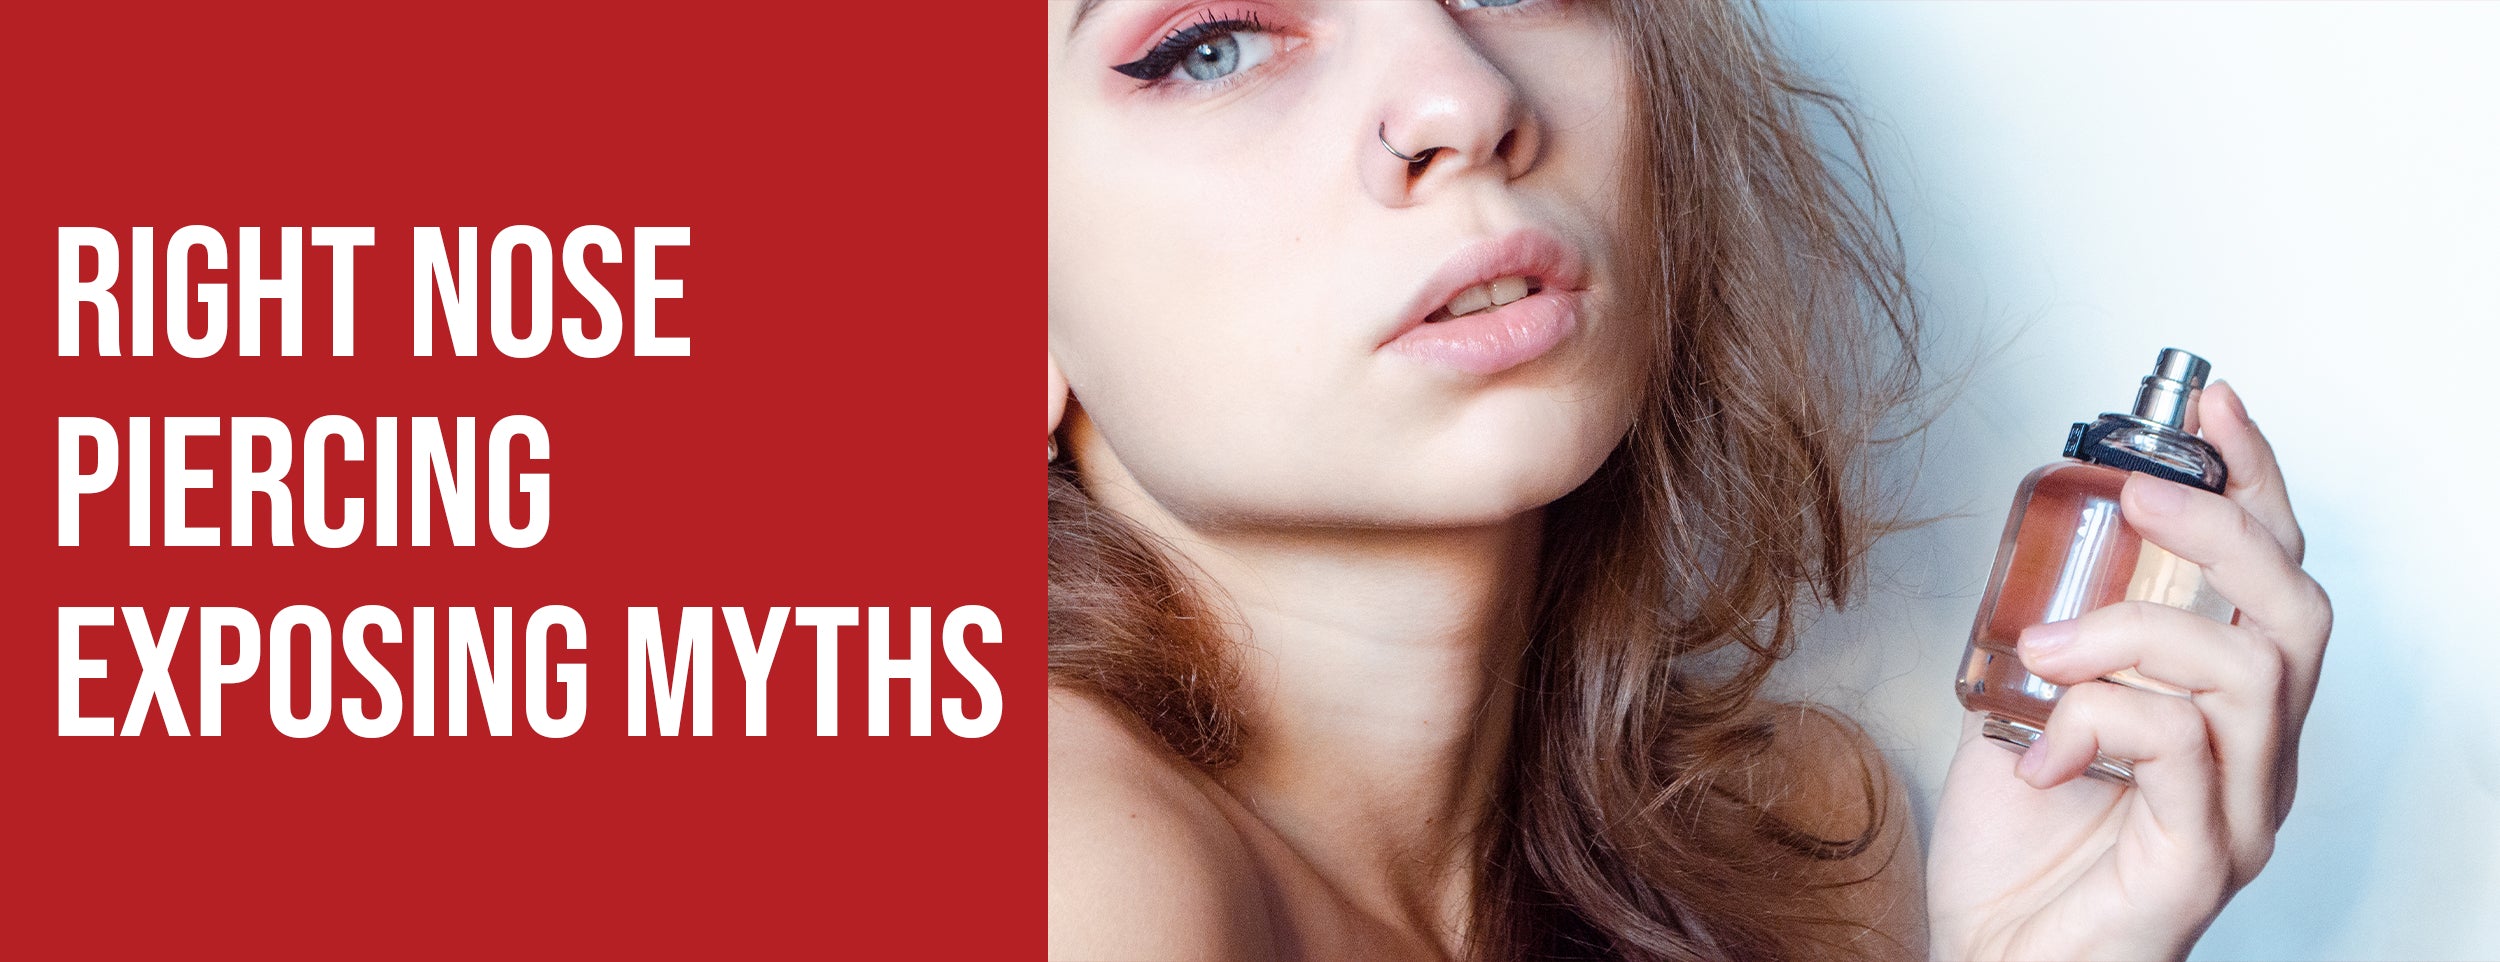 Myths about right nose piercing